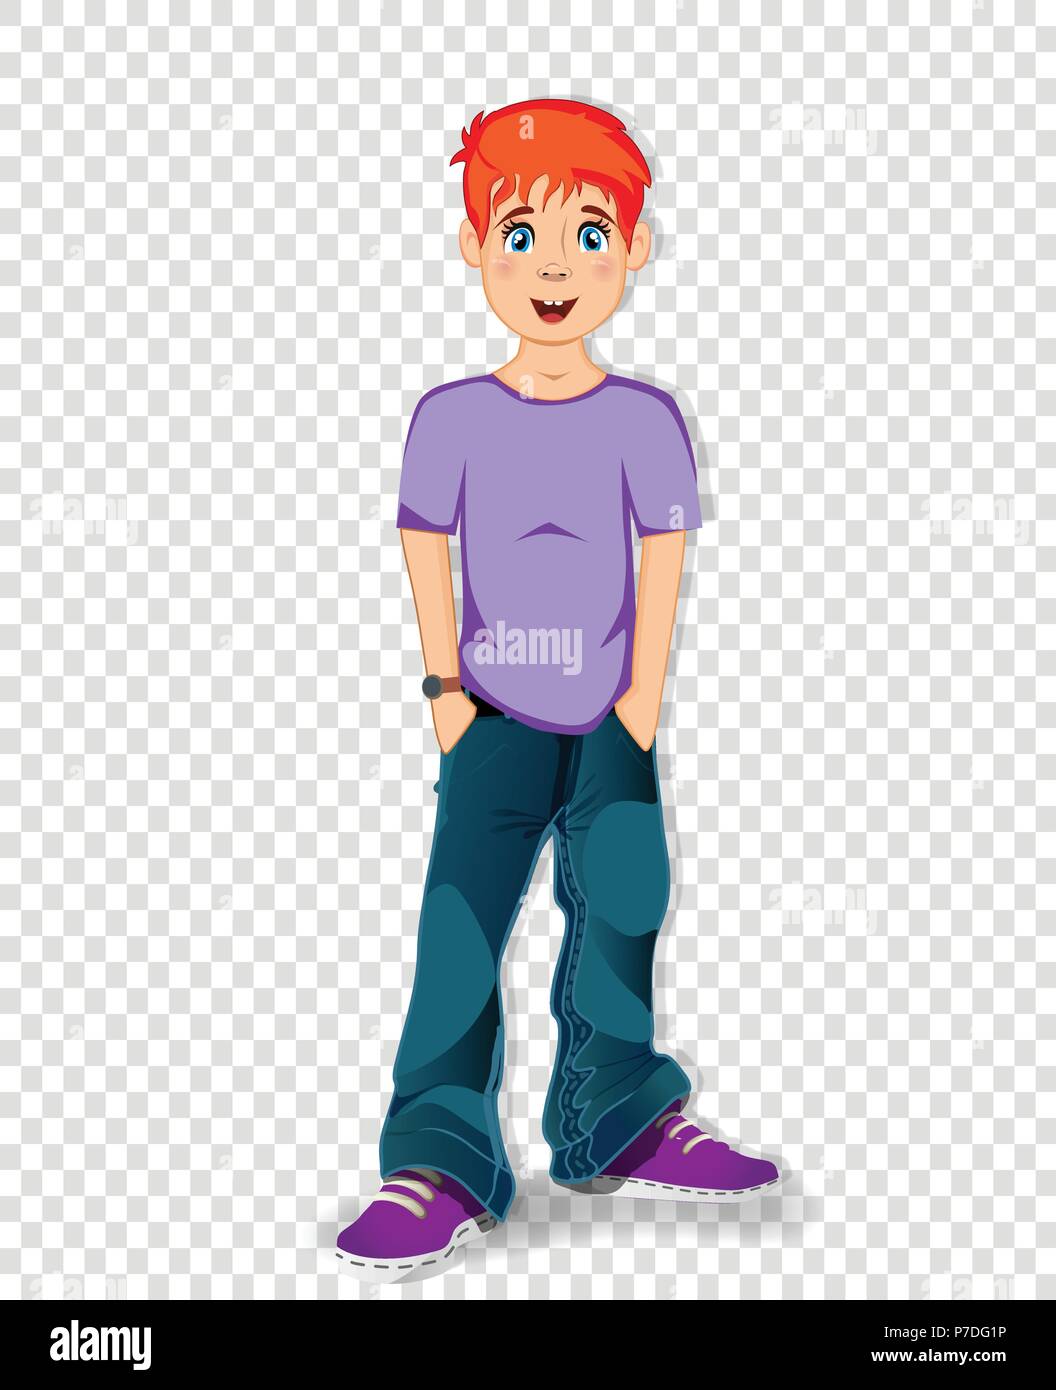 Vector illustration of cute cartoon character of teenager schoolboy with ginger hair isolated on transparent background. Cool teen boy wearing blue je Stock Vector